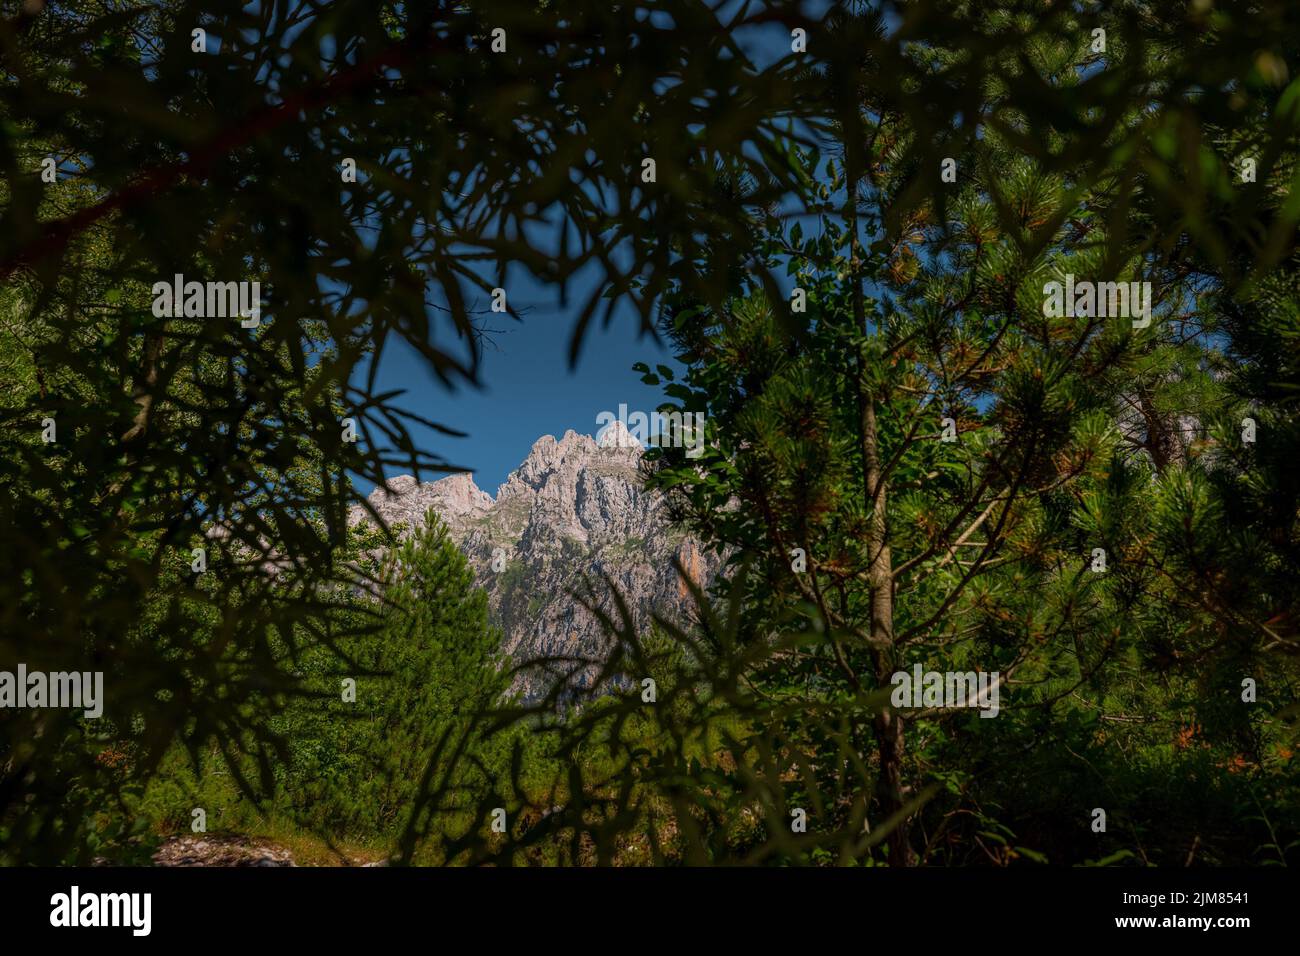 Zla kolata mountain peak observed from Valbona valley during summer time and looking through the trees and foliage. Popular hiking point in Albania. Stock Photo